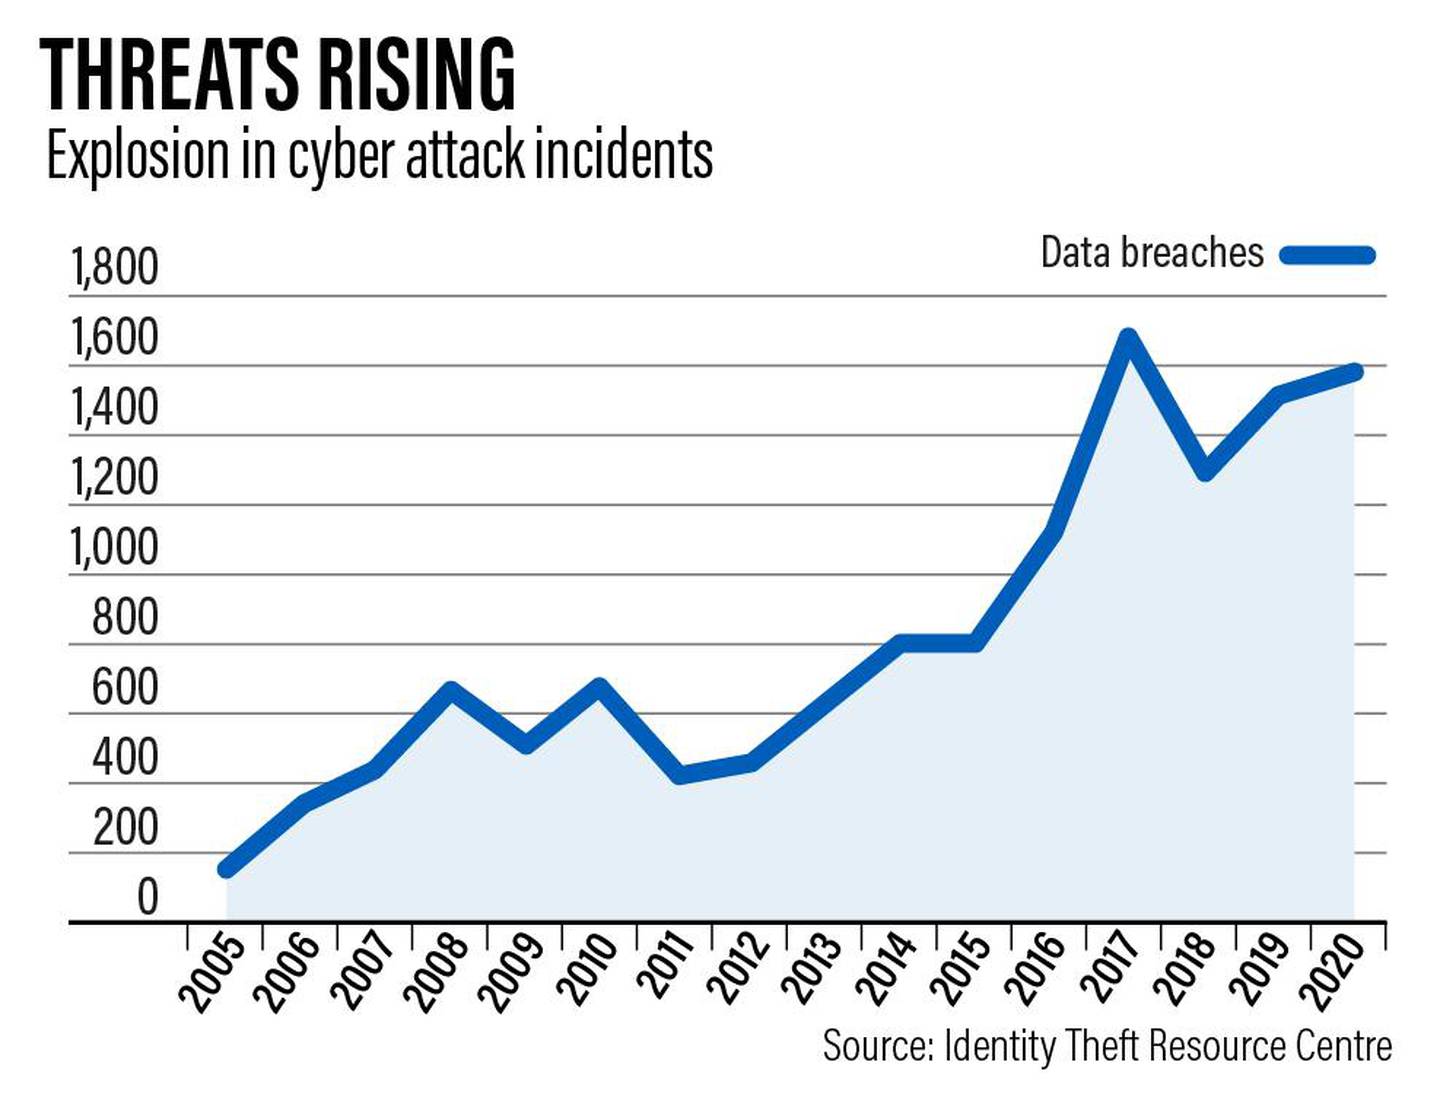 With an increasing reliance on digital financial services, the number of cyberattacks has tripled over the last decade .